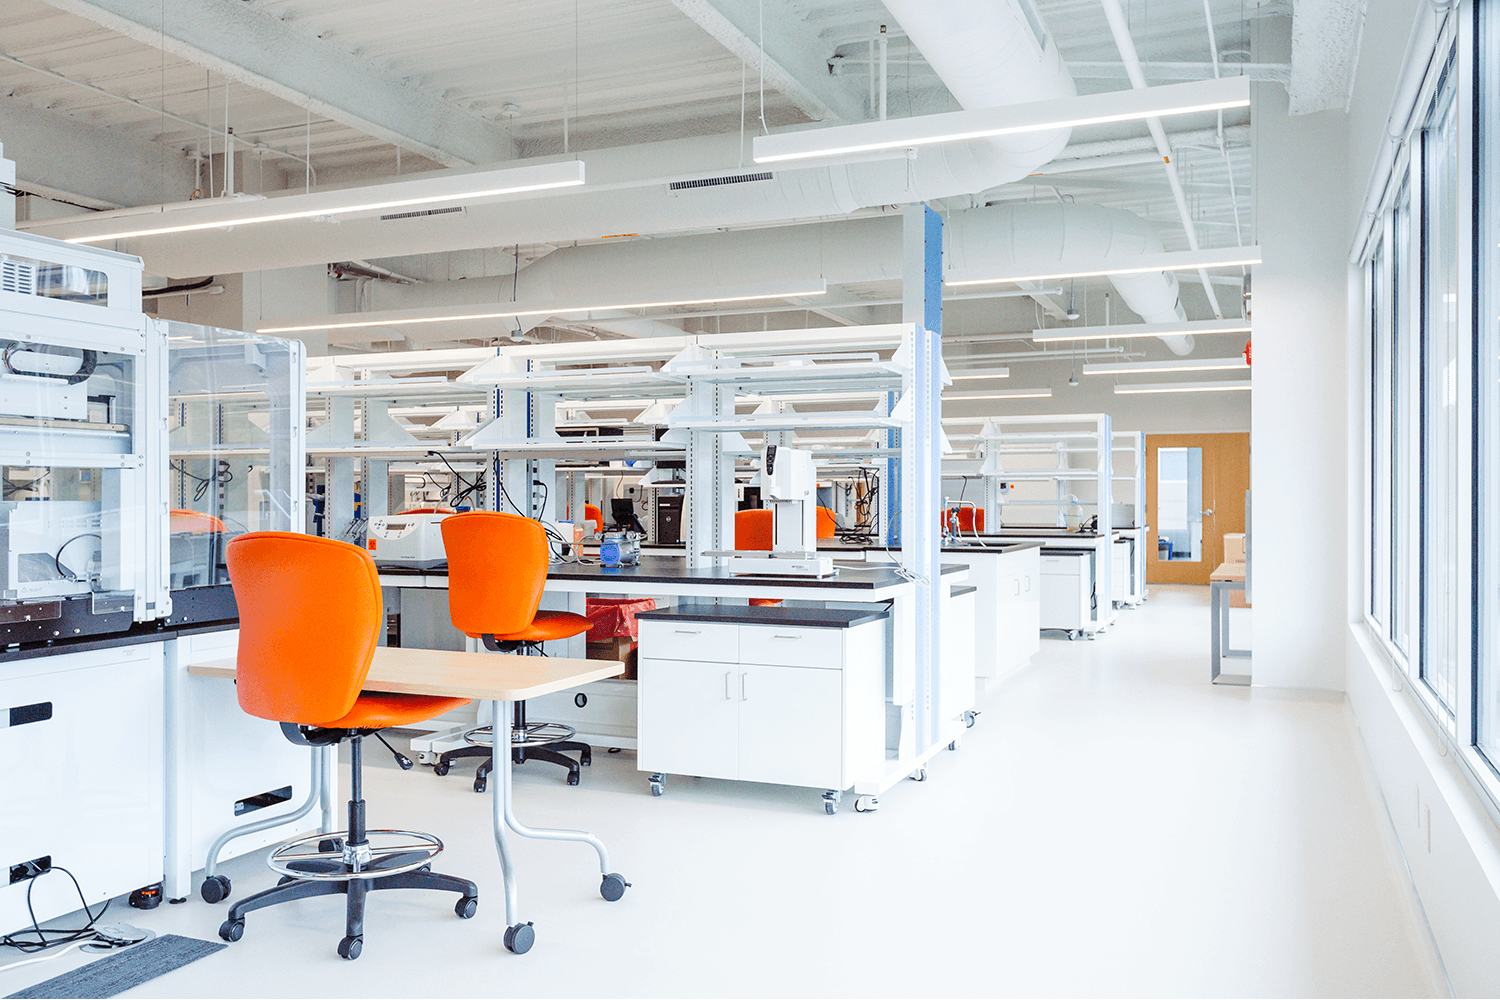 bright white lab space with lab equipment and orange chairs